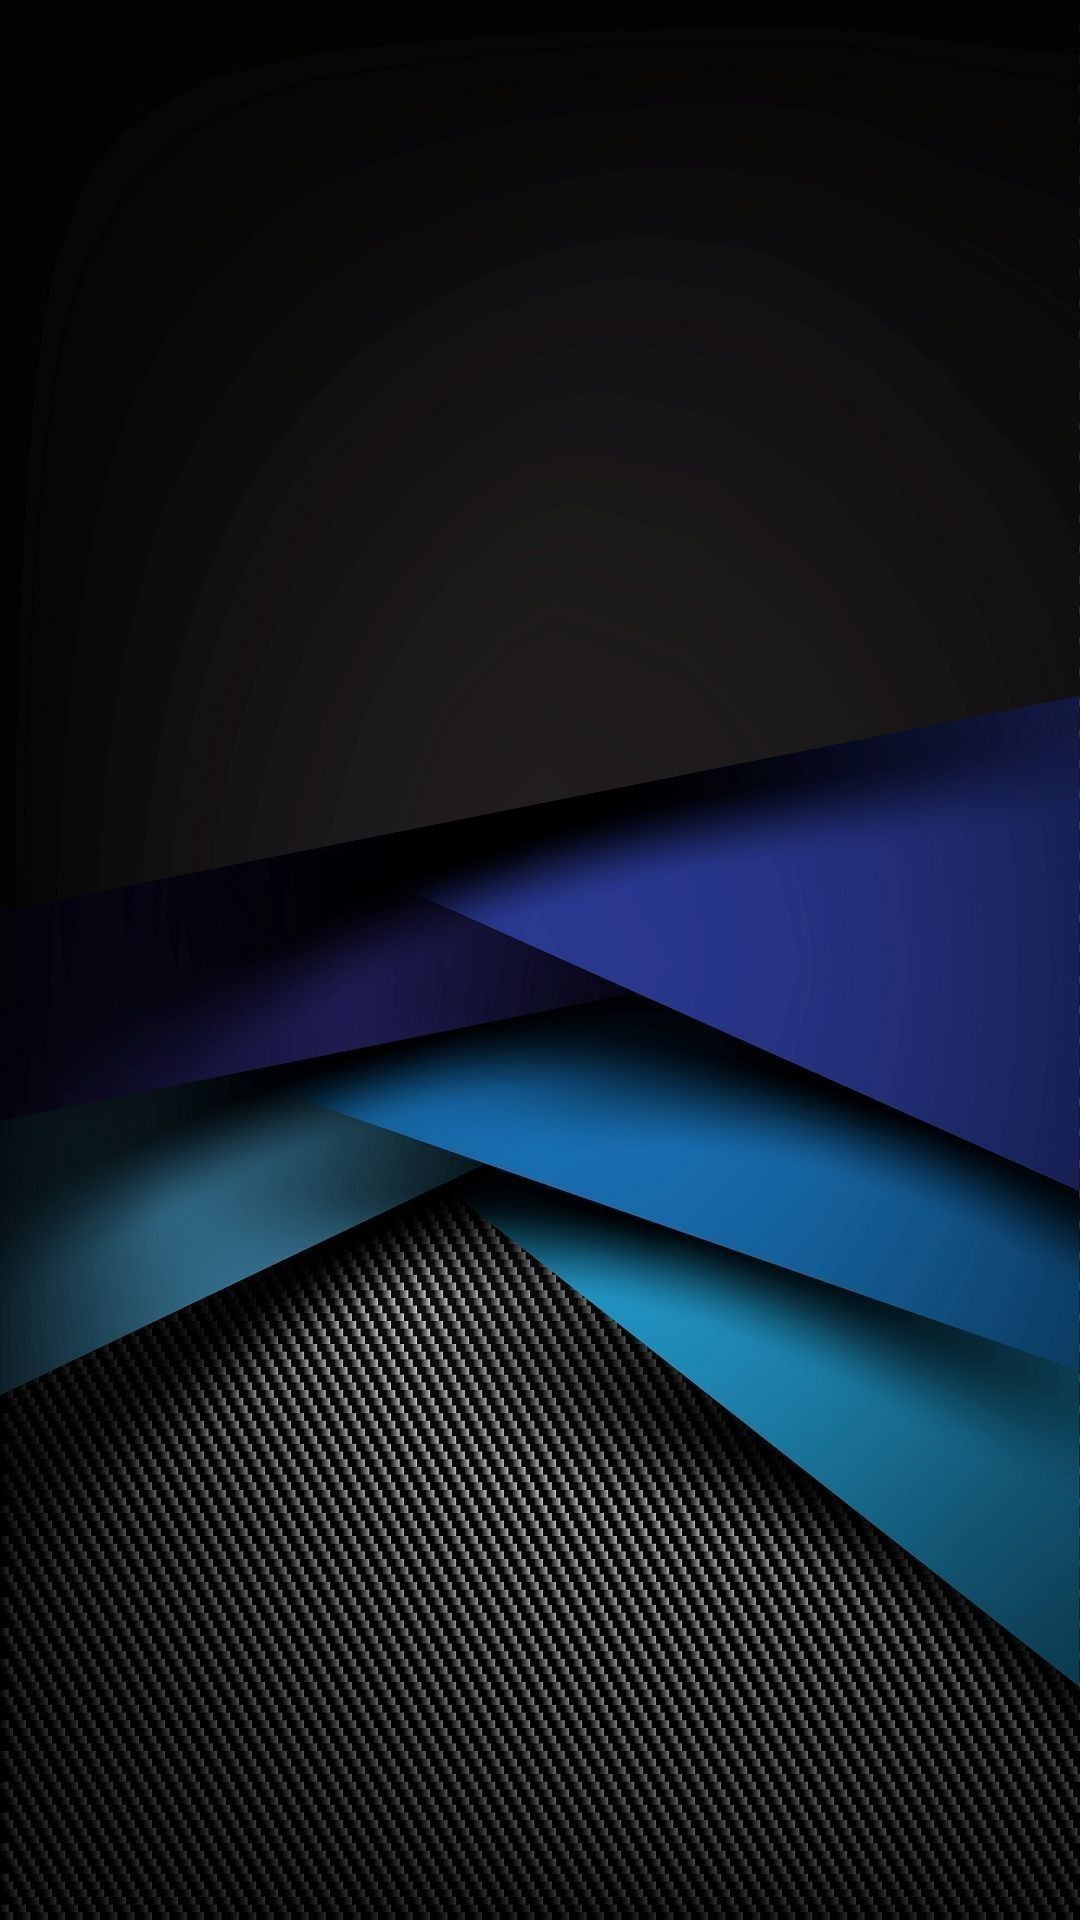 abstract hd phone wallpapers